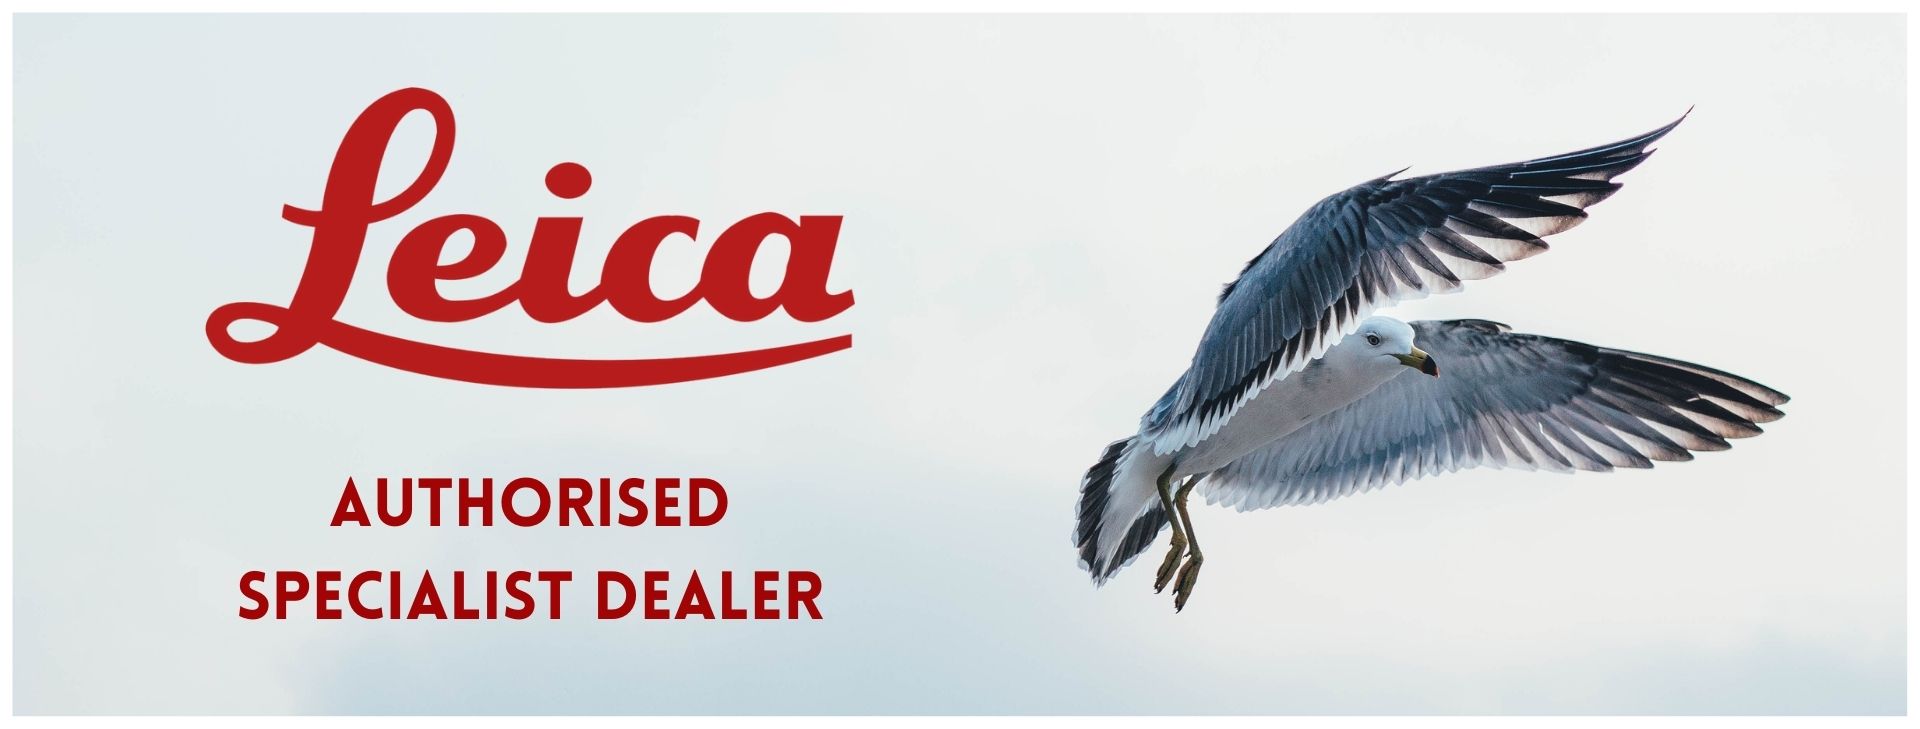 ace optics is a leica authorised dealer. seagull picture